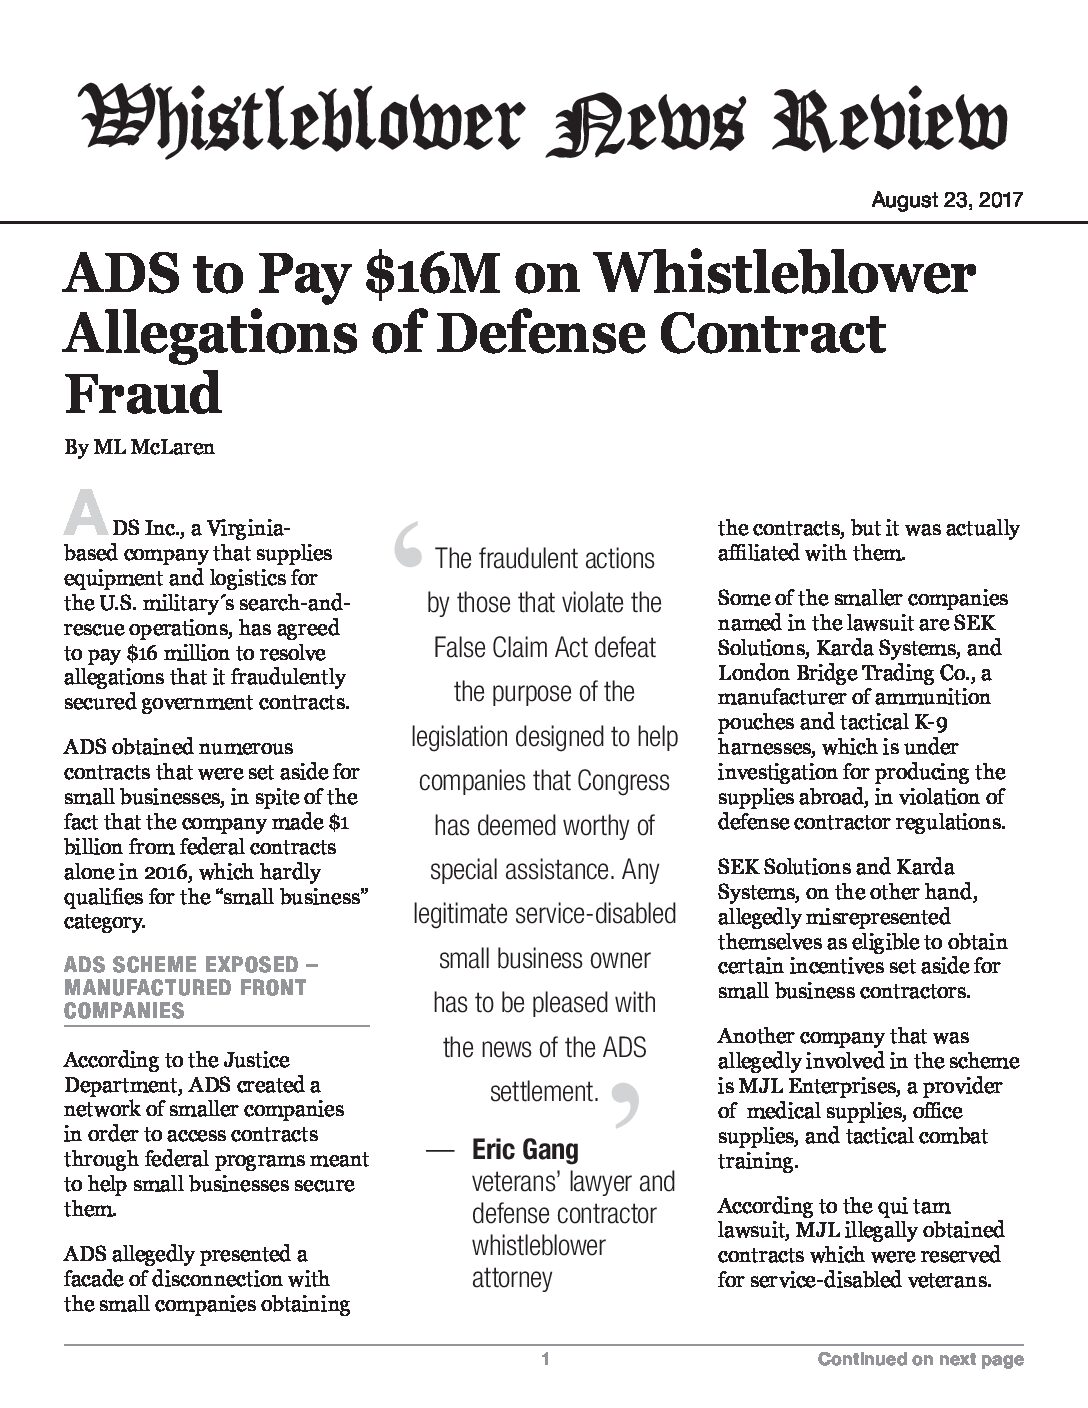 ADS to Pay $16M on Whistleblower Allegations of Defense Contract Fraud